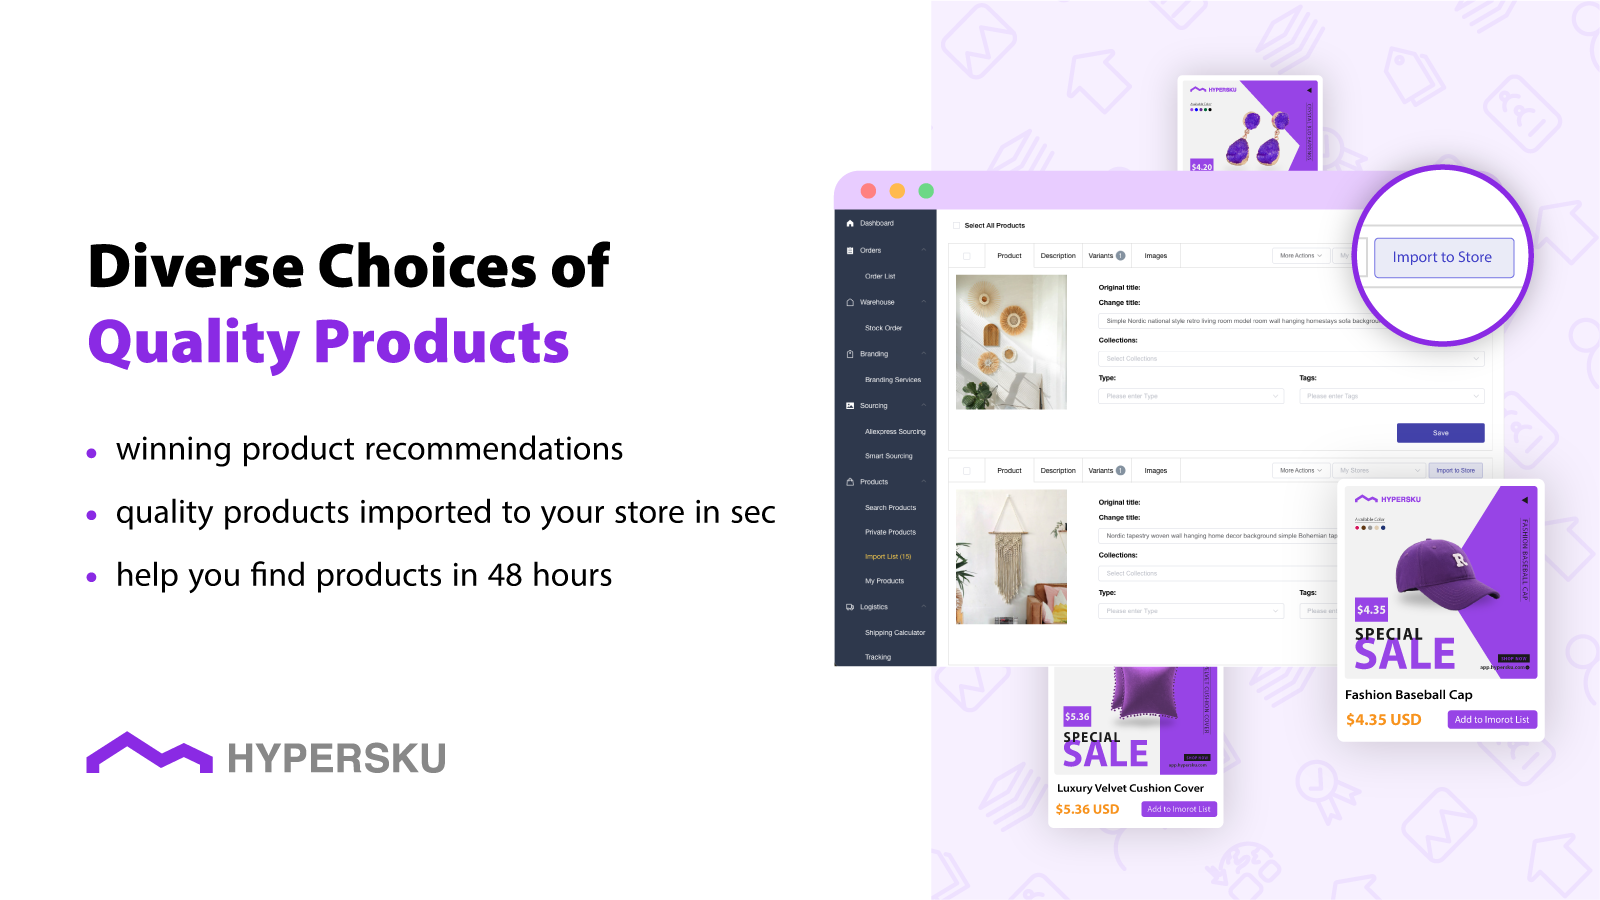 source products in 48 hours-HyperSKU PRO Dropshipping